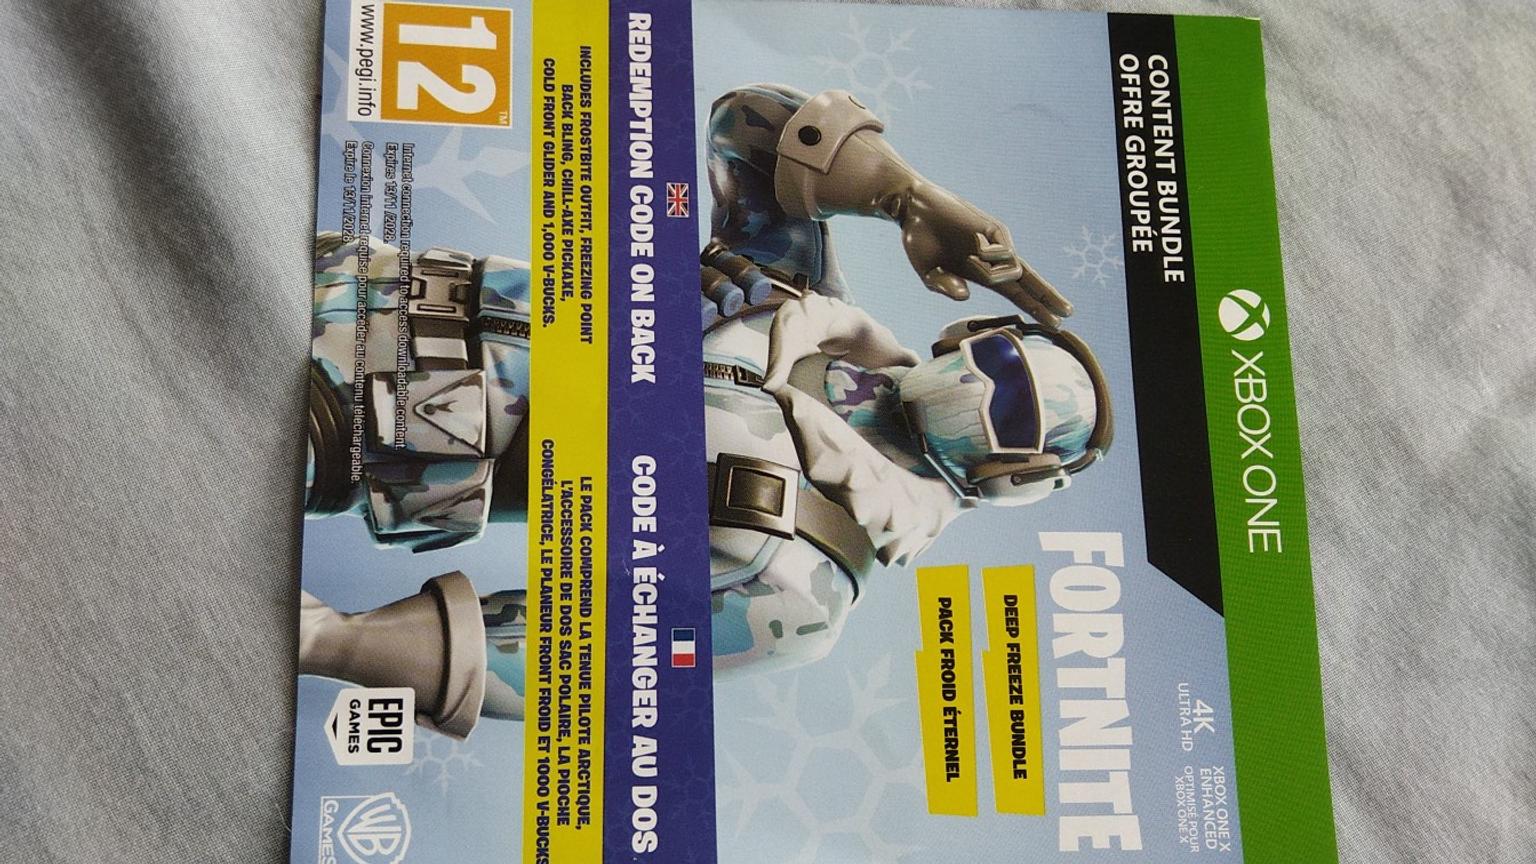 Fortnite Deep Freeze Bundle In Ba14 Southwick For 15 00 For Sale